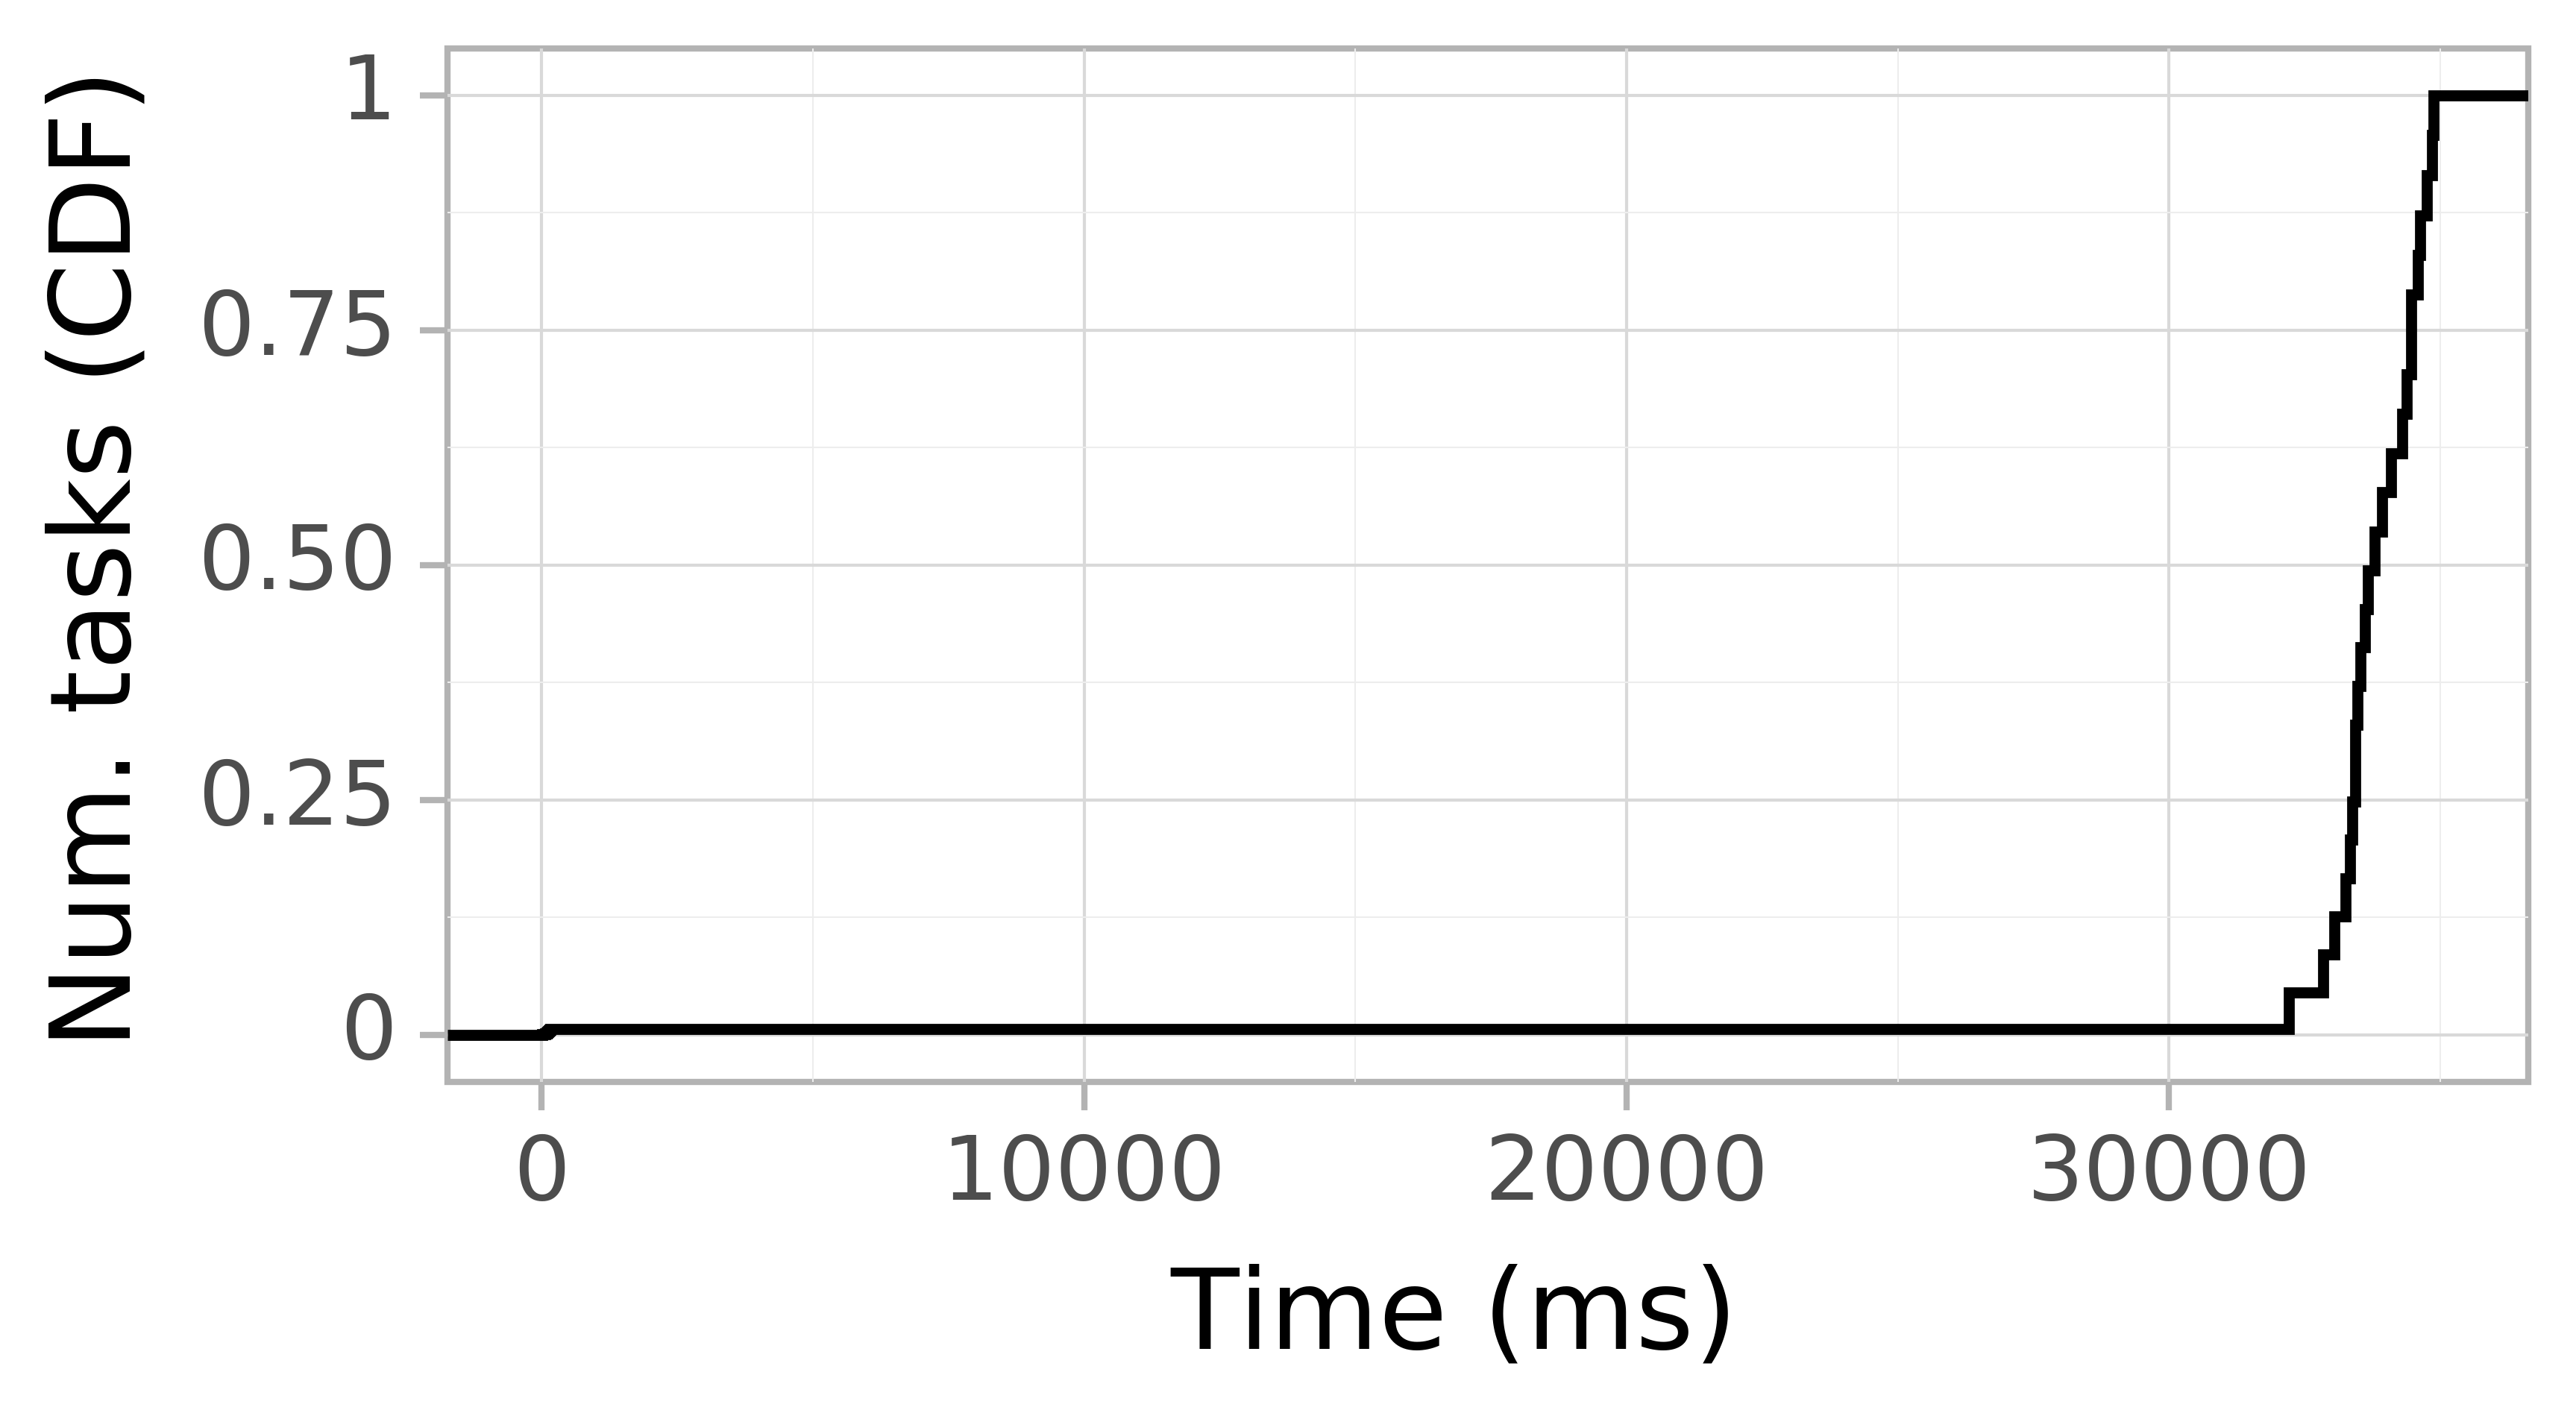 Task arrival CDF graph for the Pegasus_P3 trace.